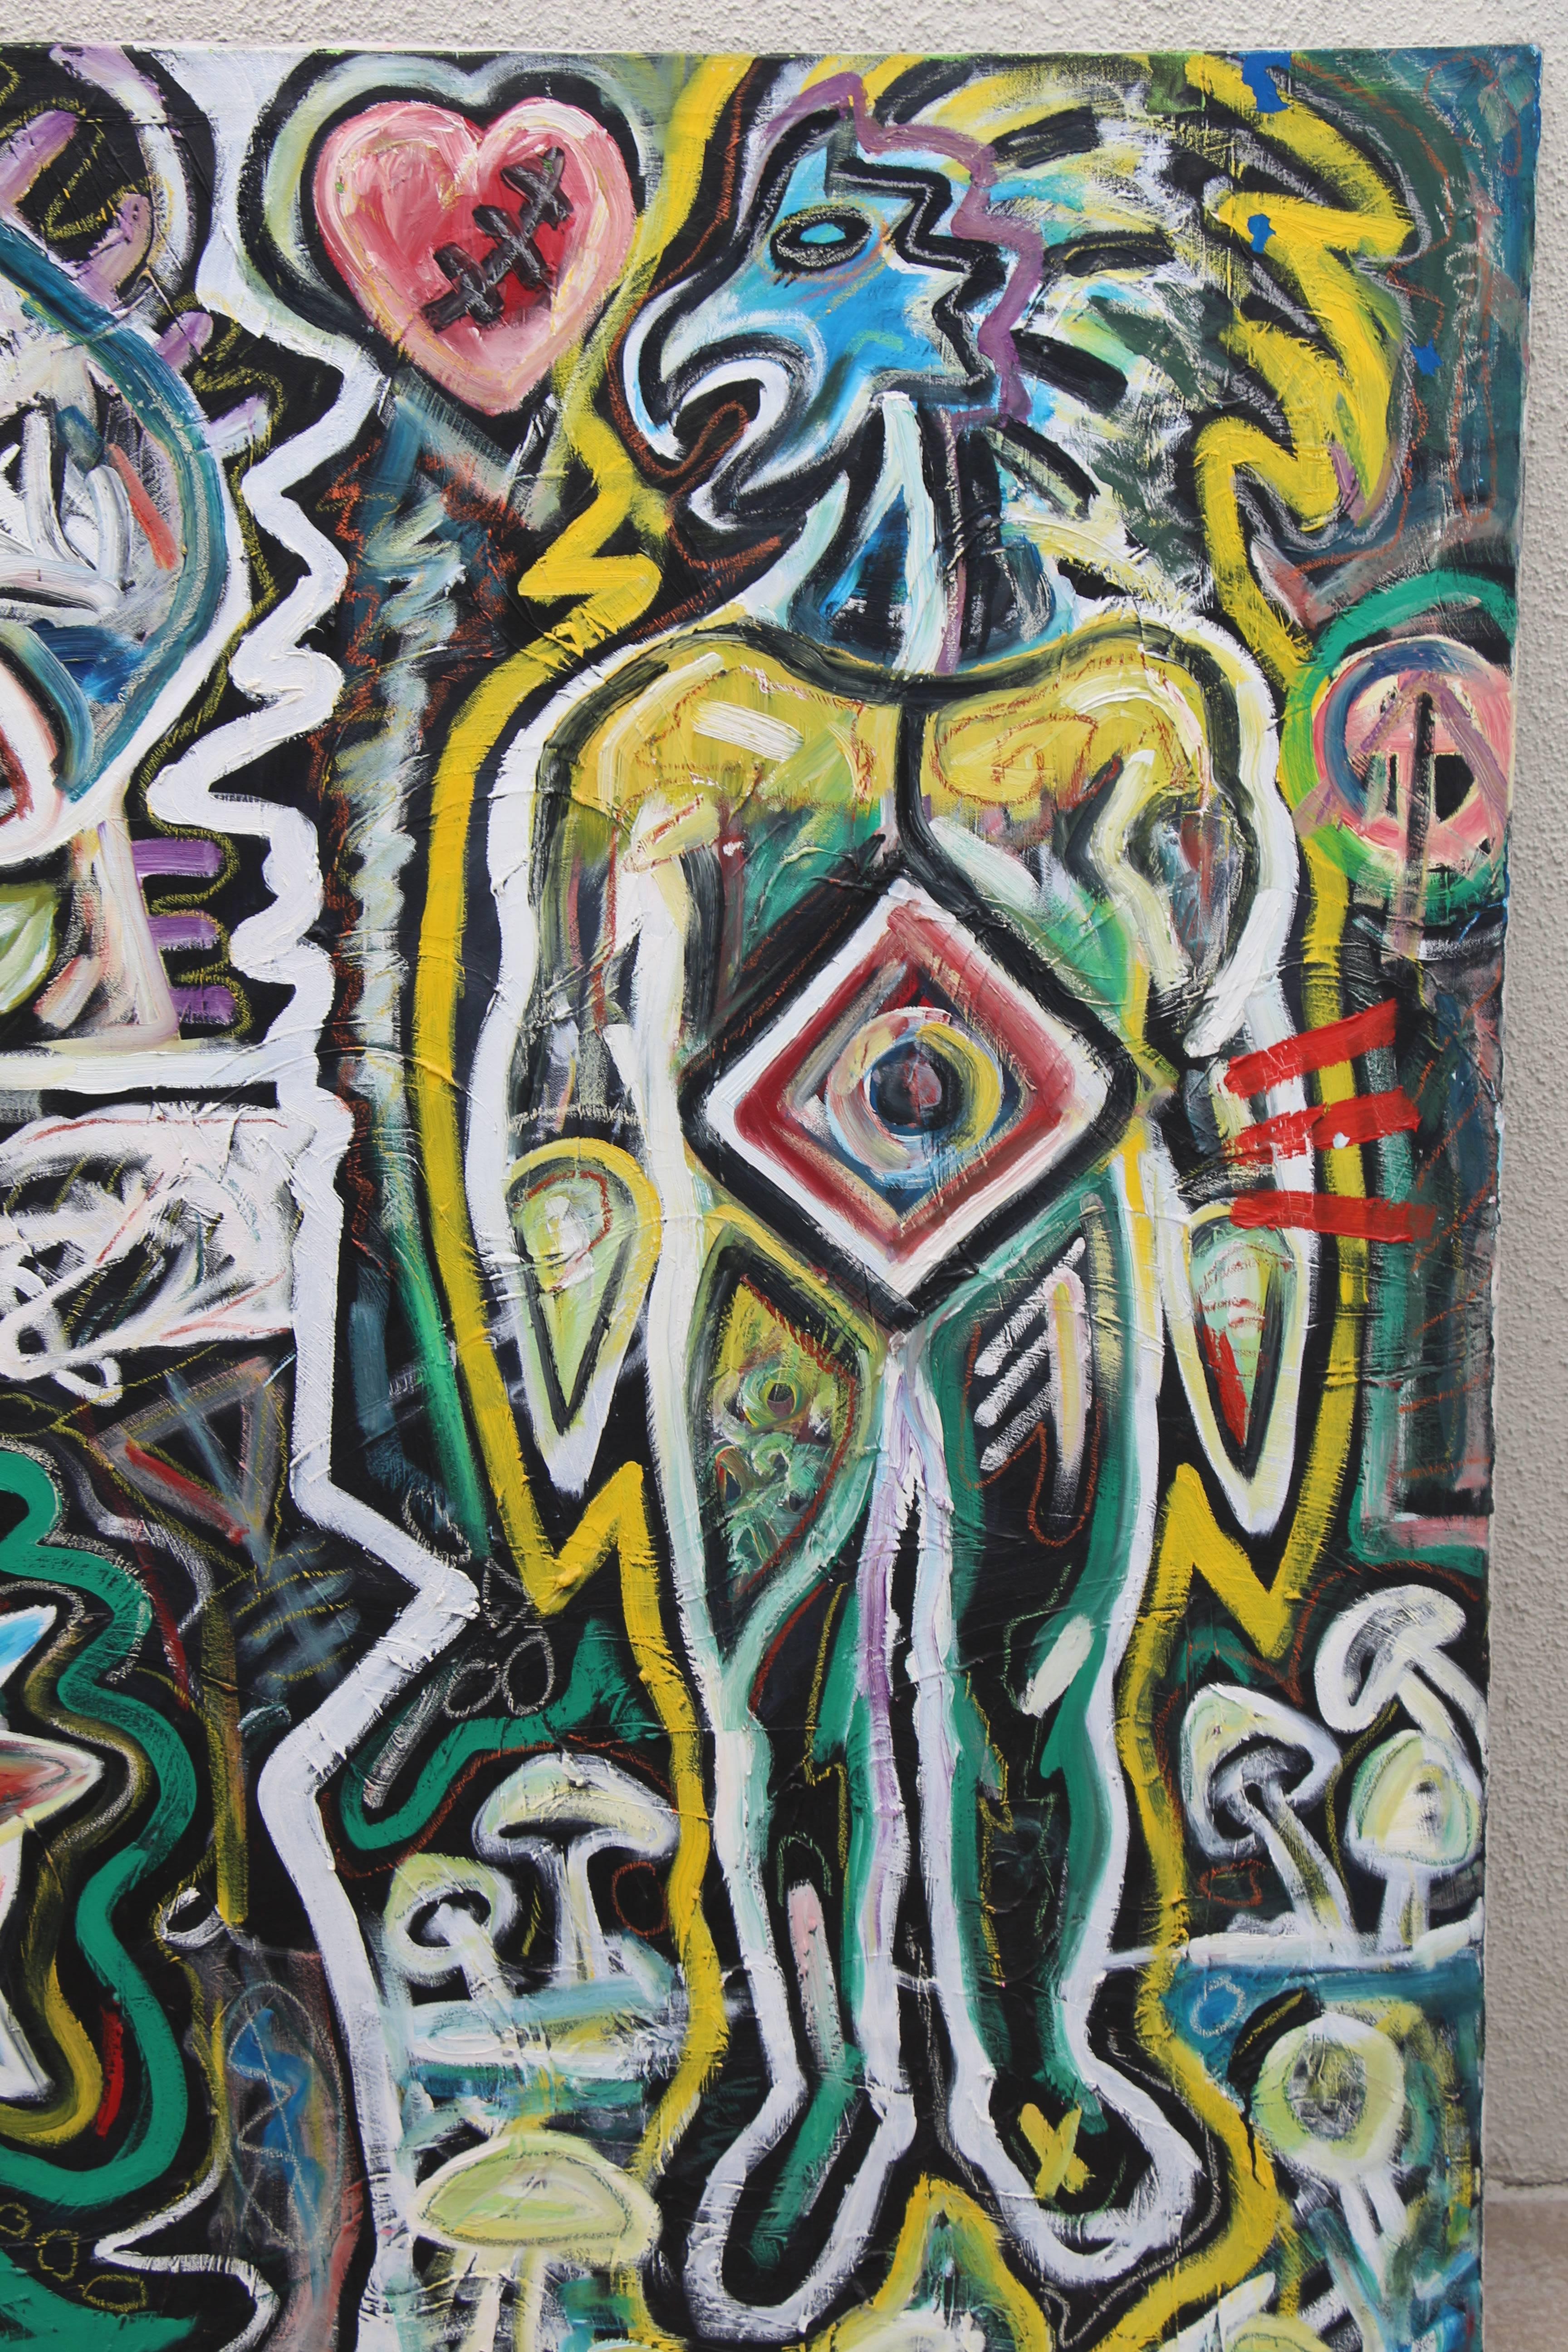 Striking Graffiti triptych by a deceased Palm Springs, CA artist commenting on his decline. In the style of Modern masters like Basquiat and Haring. It has density and is evenly painted and one of his last works.
